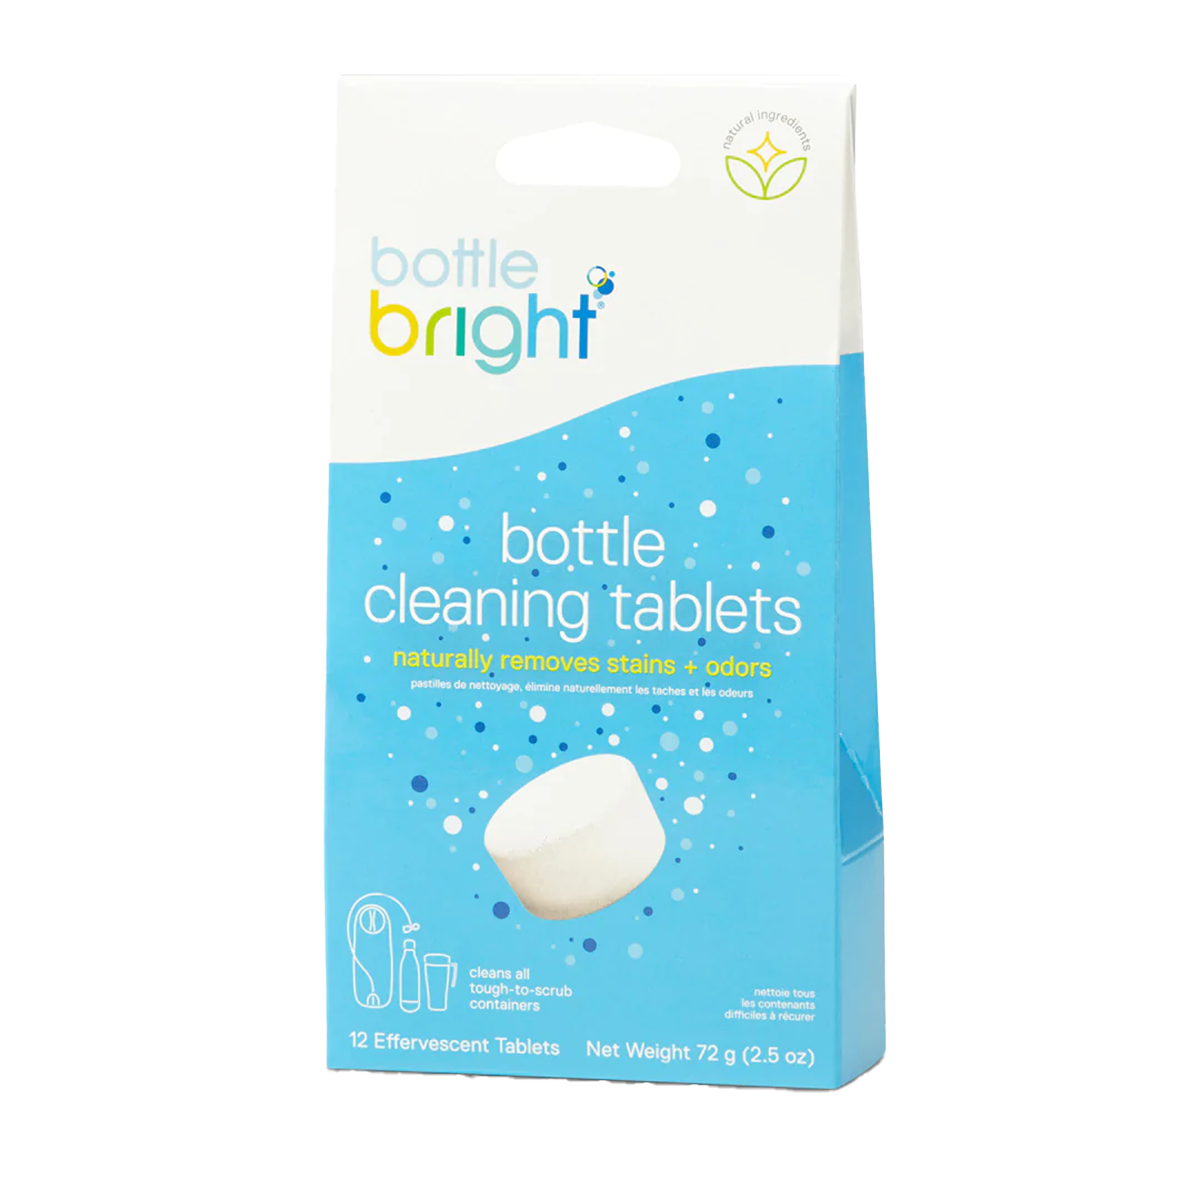 Bottle Bright Natural Cleaning Tablets Review - Safe and Effective?